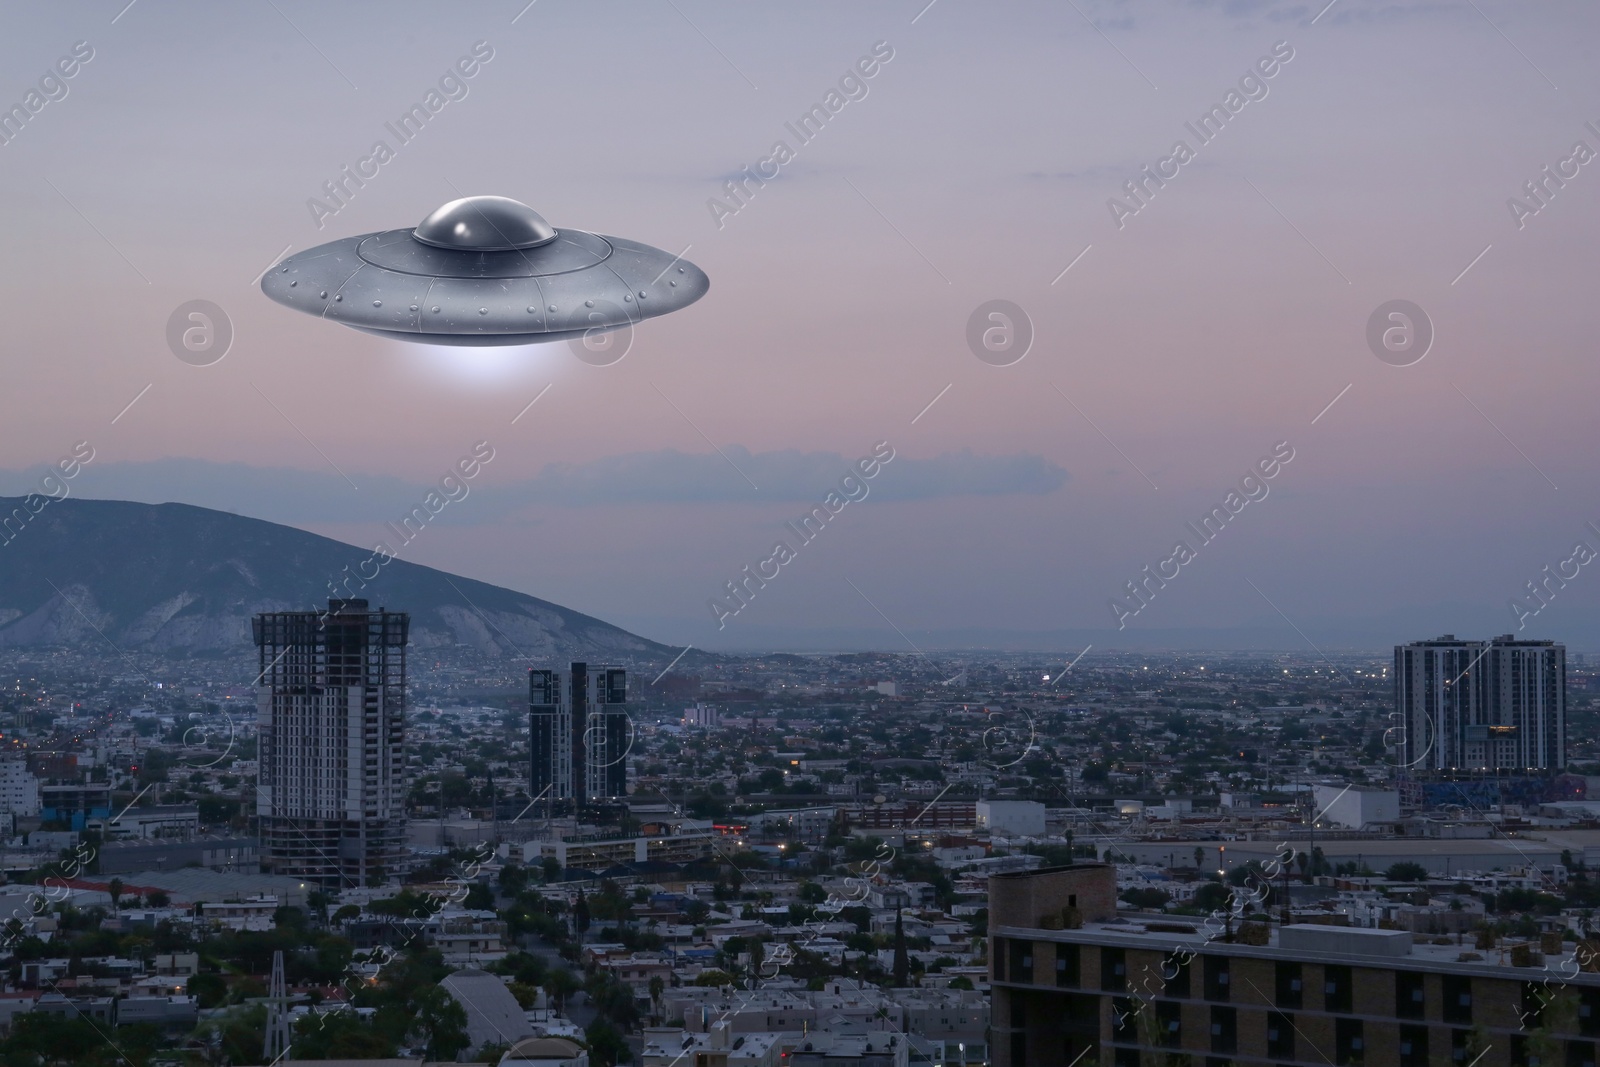 Image of Alien spaceship flying over city in morning. UFO, extraterrestrial visitors